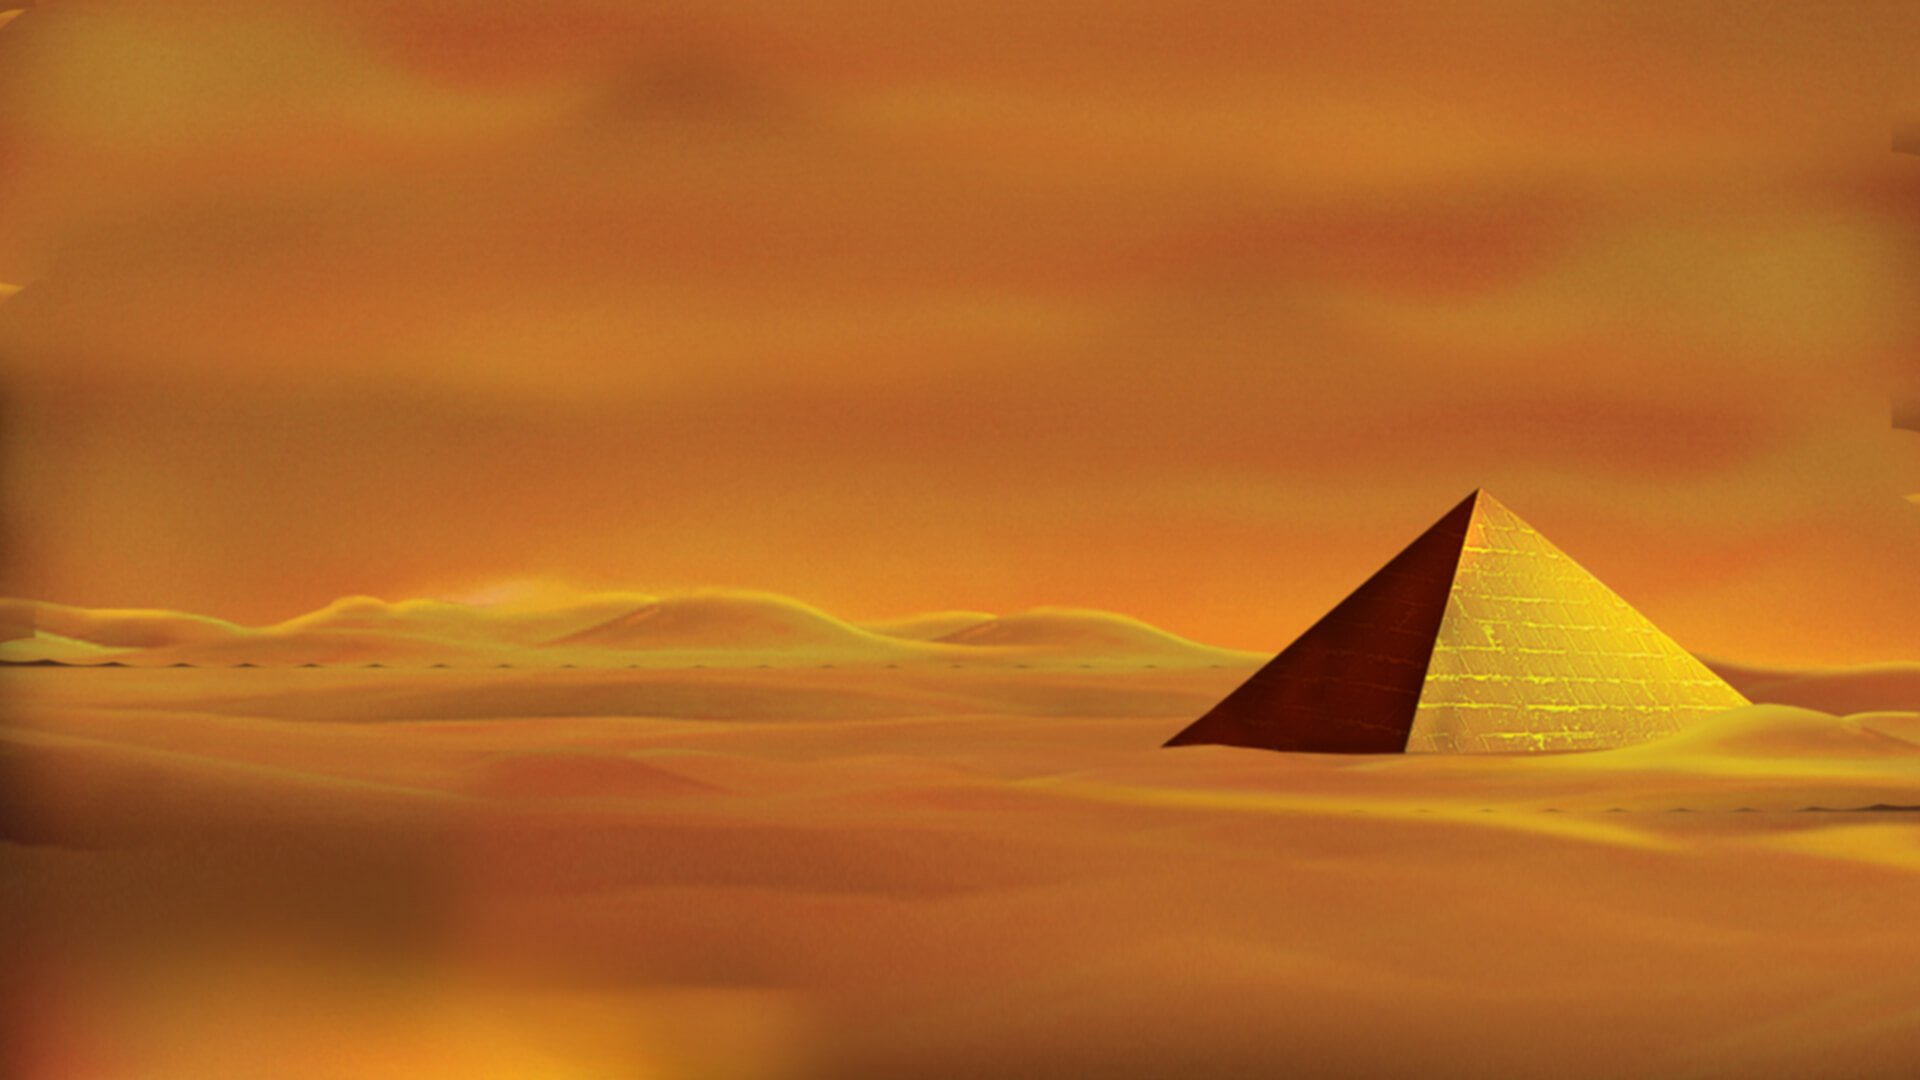 Game hight resolution background Rise of Ra